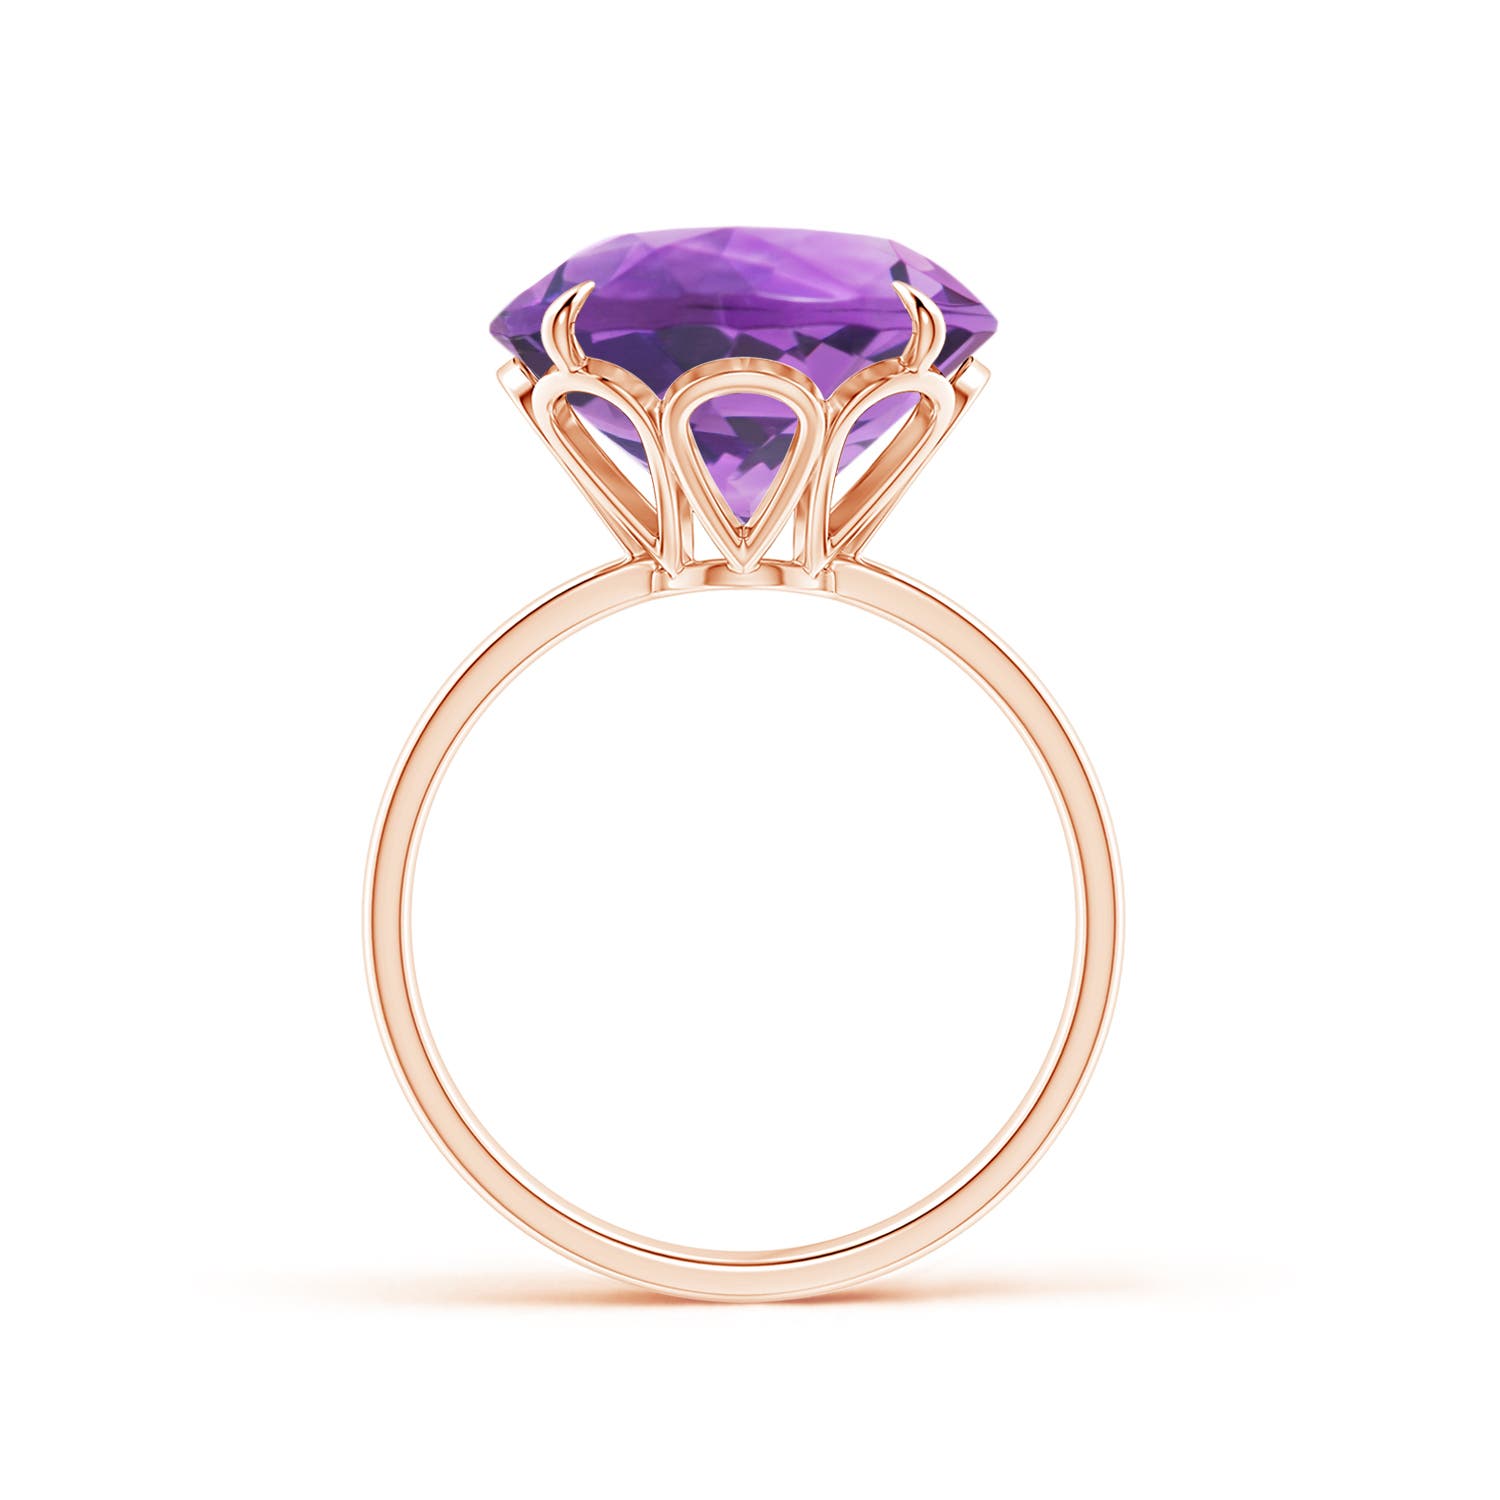 AA- Amethyst / 7.2 CT / 14 KT Rose Gold